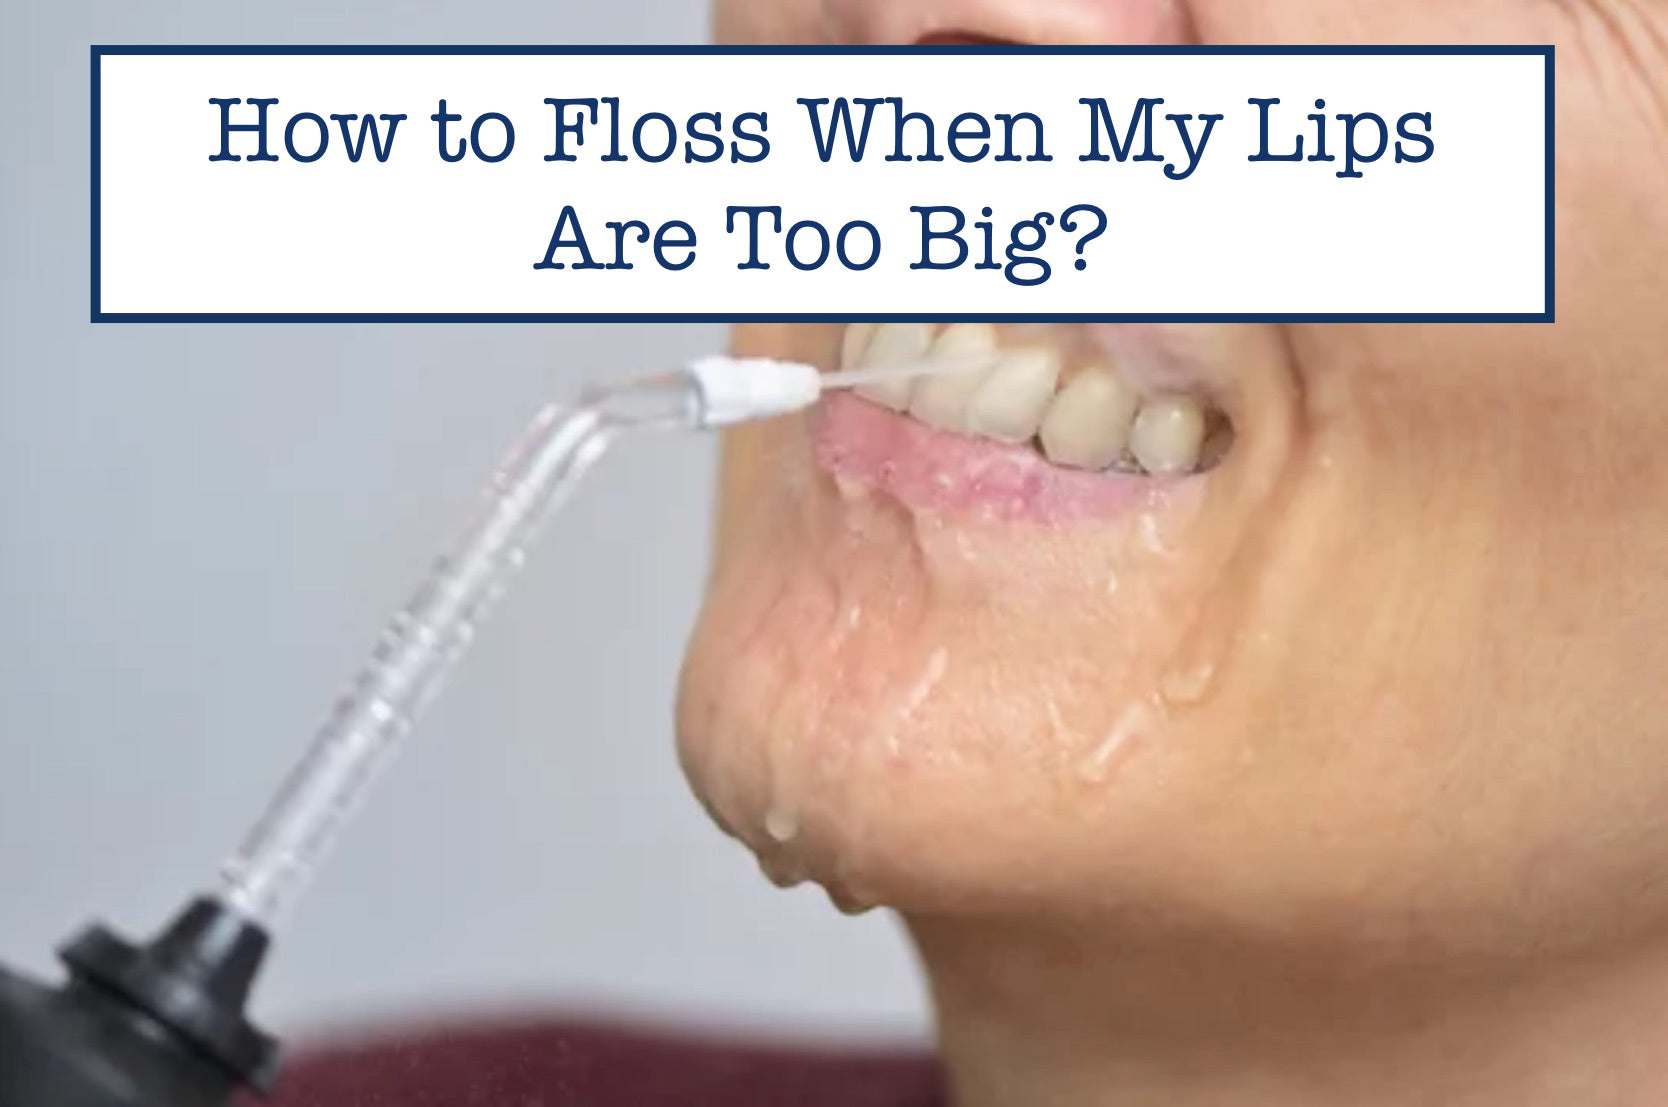 How to Floss When My Lips Are Too Big?